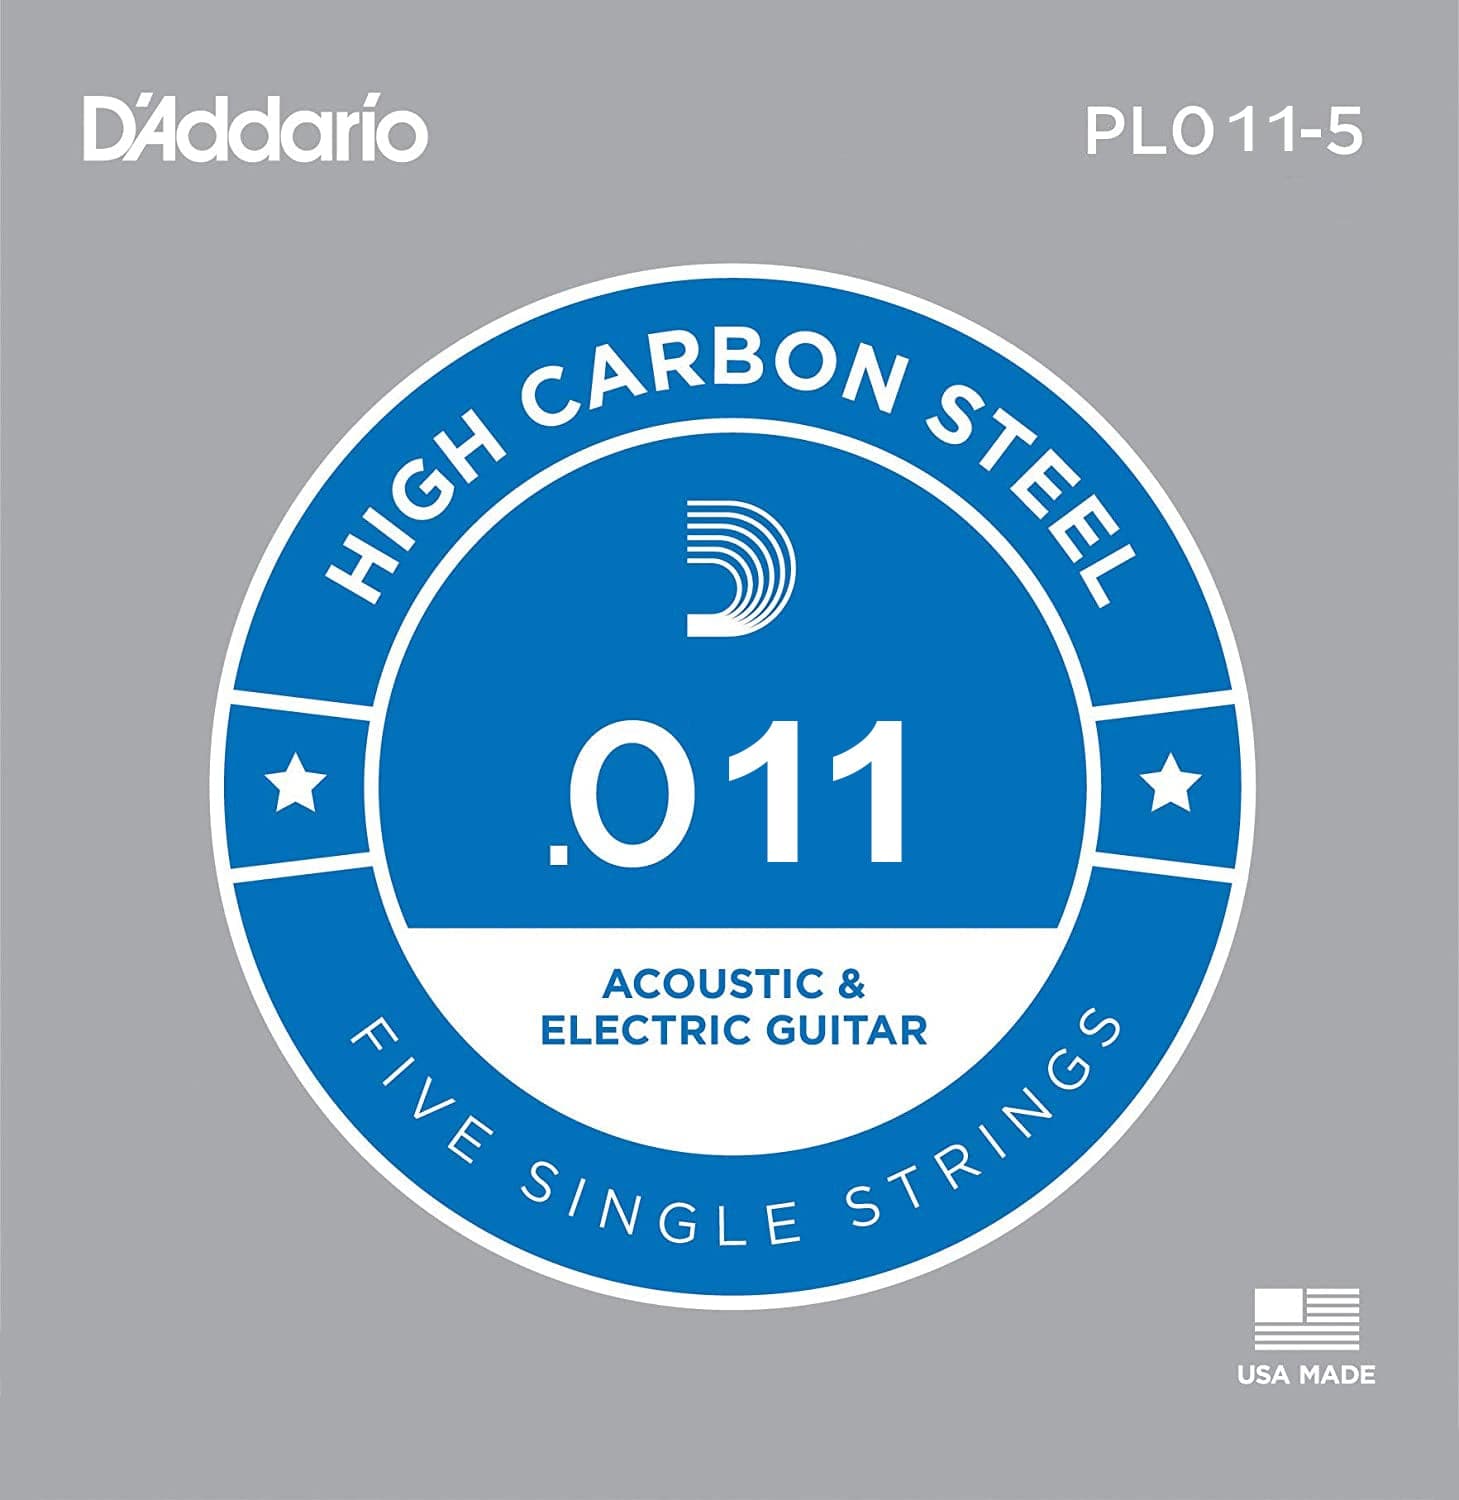 D'Addario 5x Plain Steel Guitar Strings .011 for Electric & Acoustic